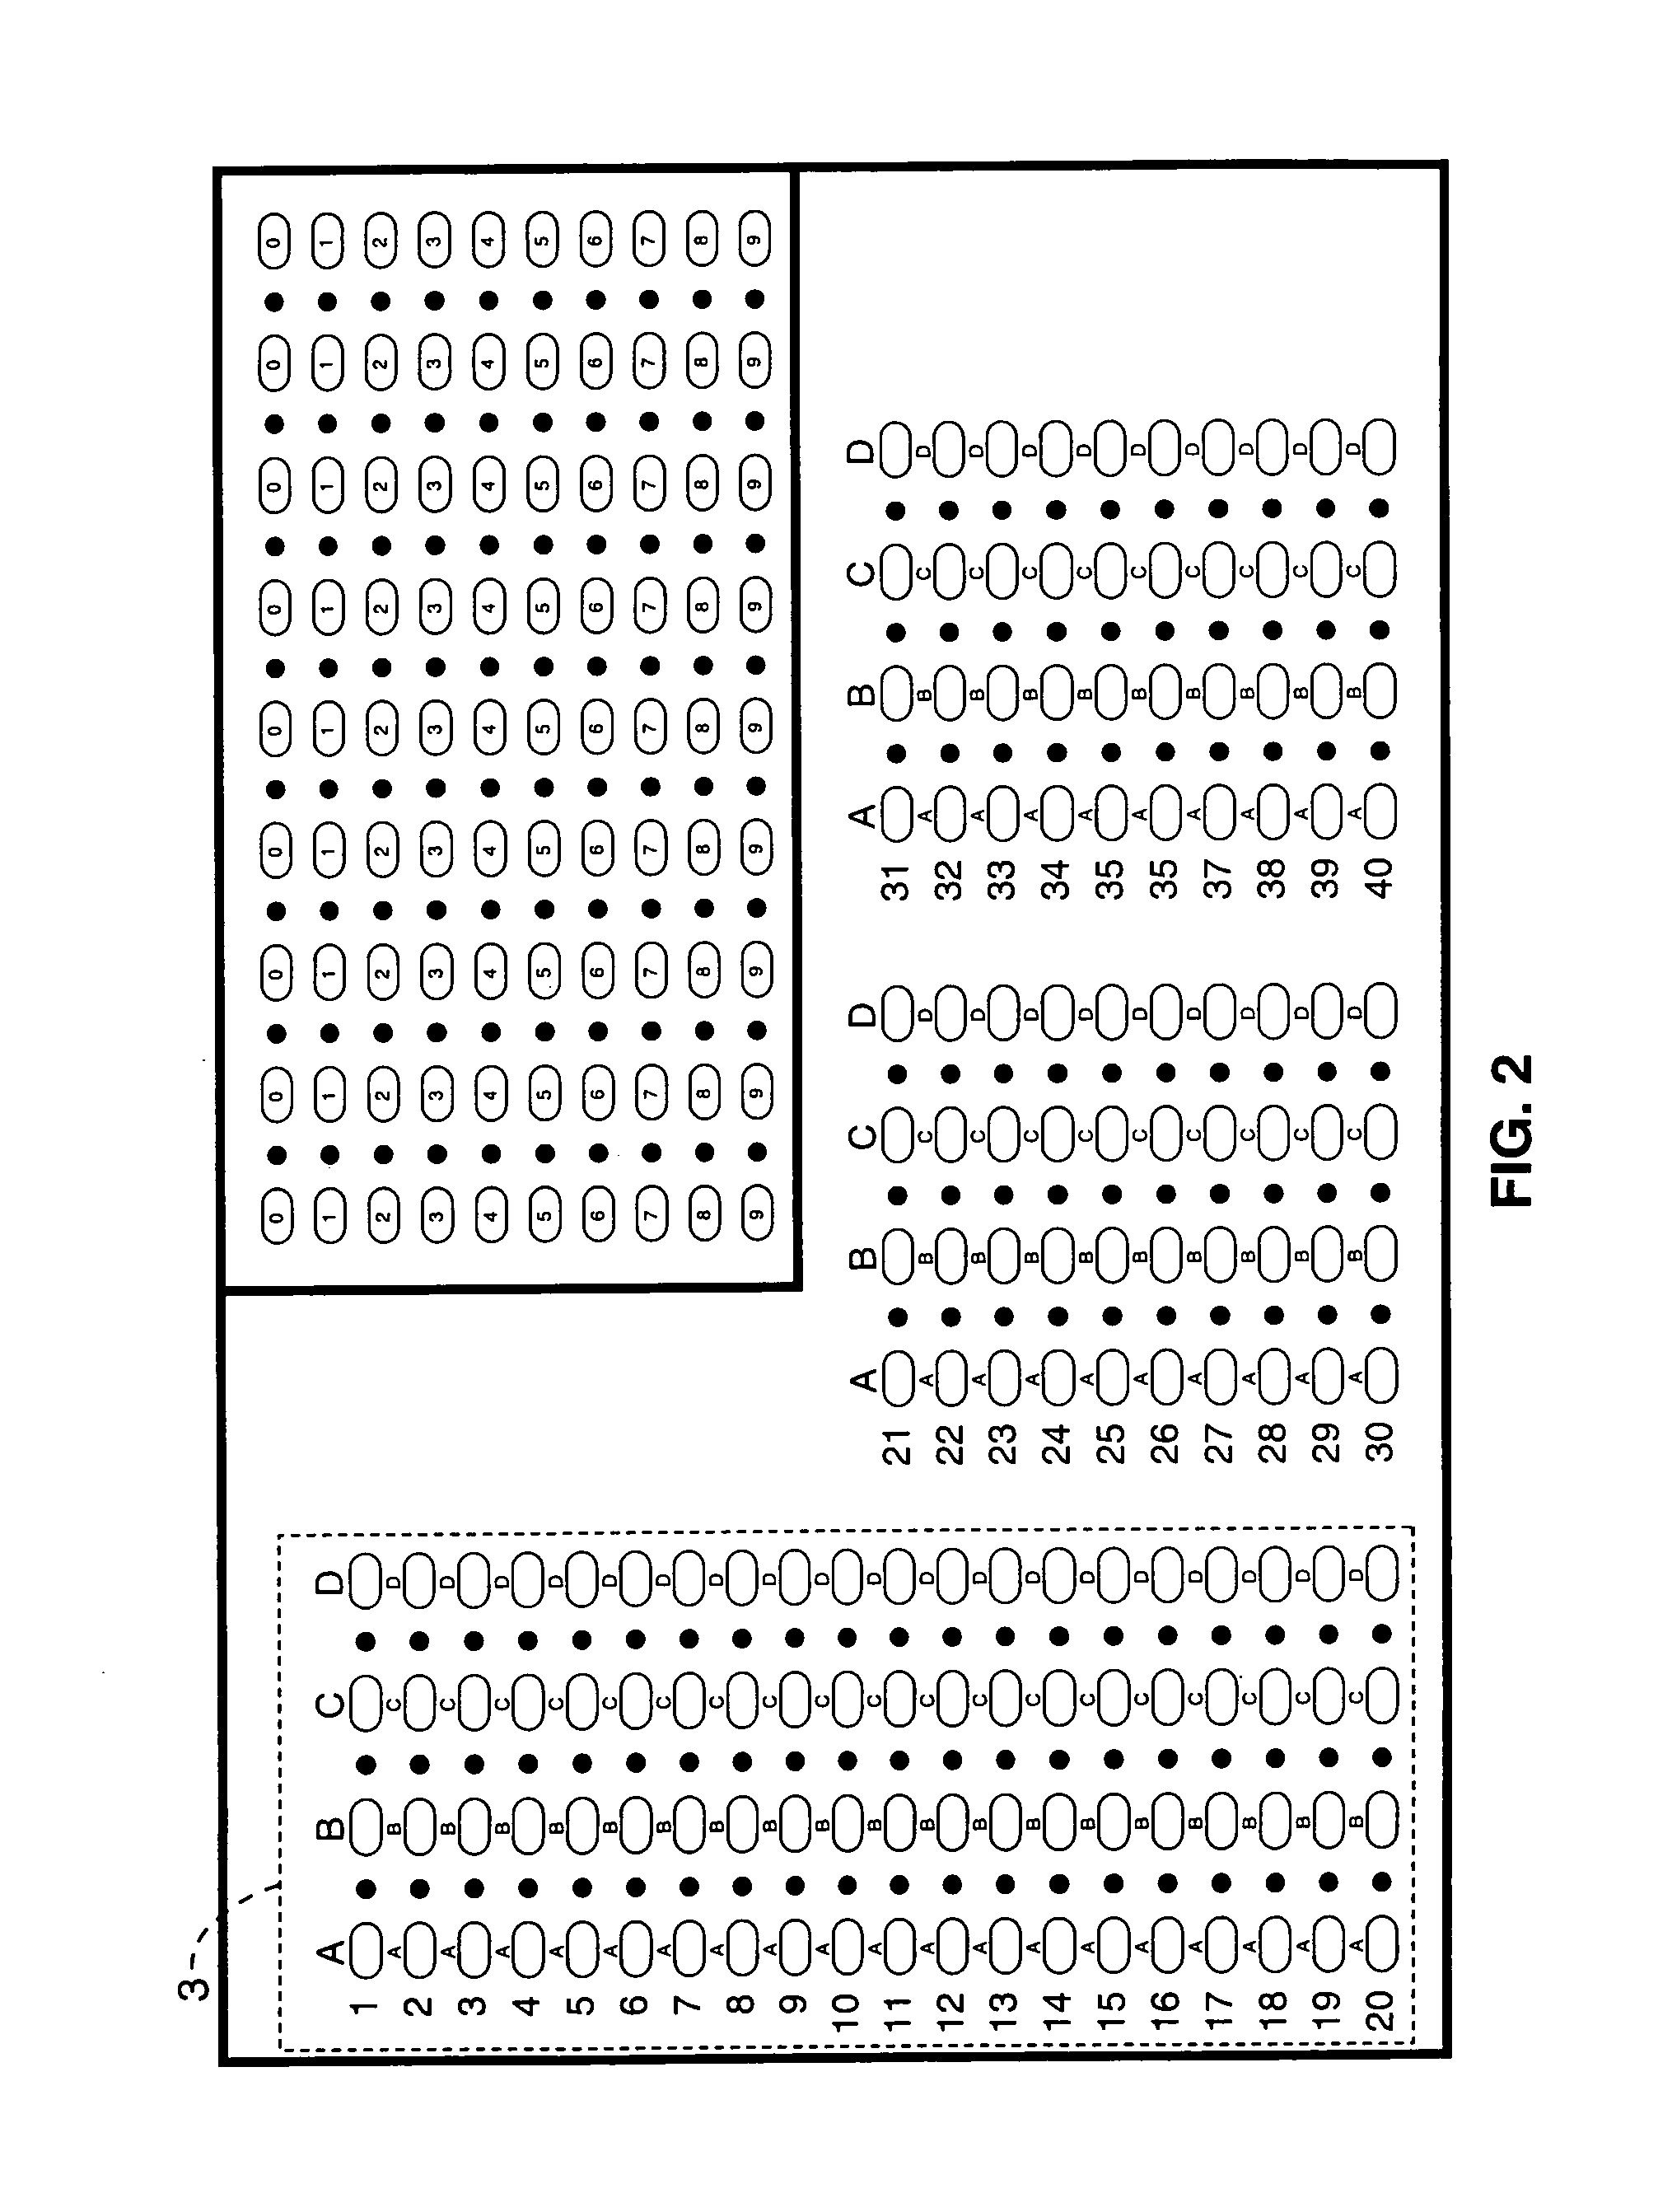 System for automatically reading a response form using a digital camera